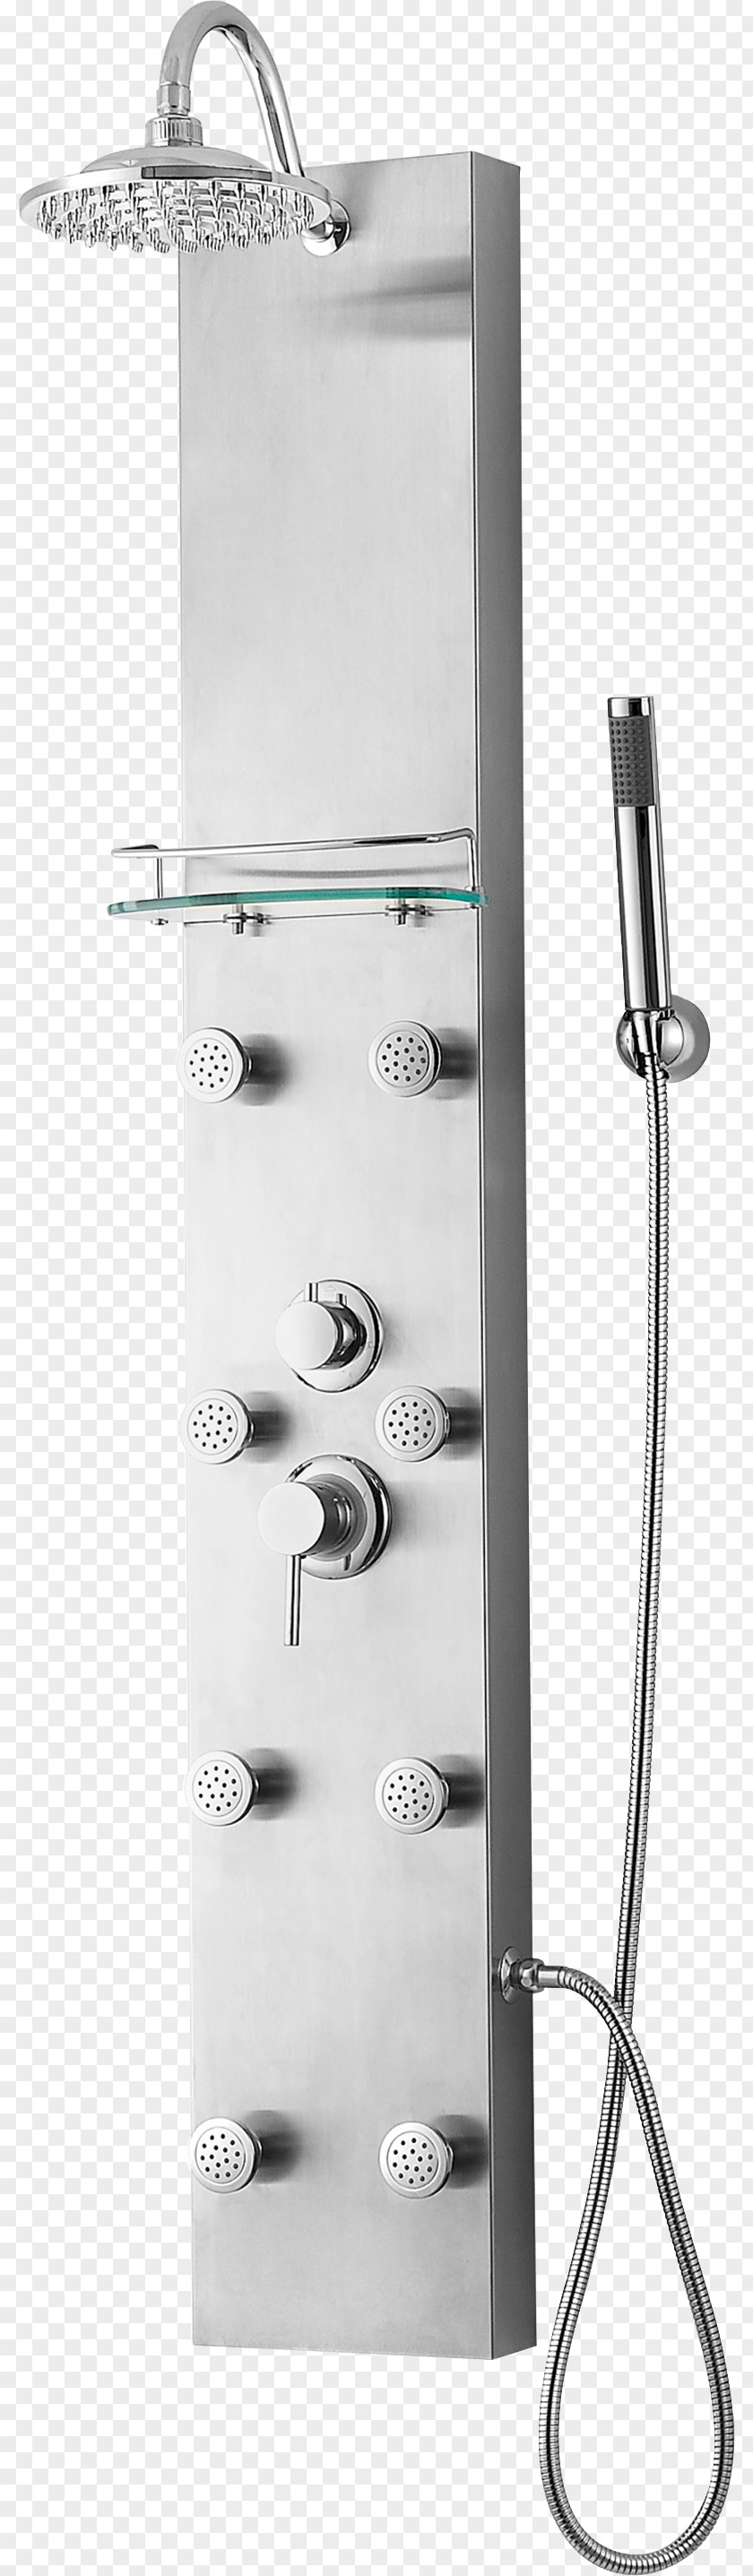 Bathroom Wall Shelves Faucet Handles & Controls Shower Thermostatic Mixing Valve Stainless Steel Spray PNG